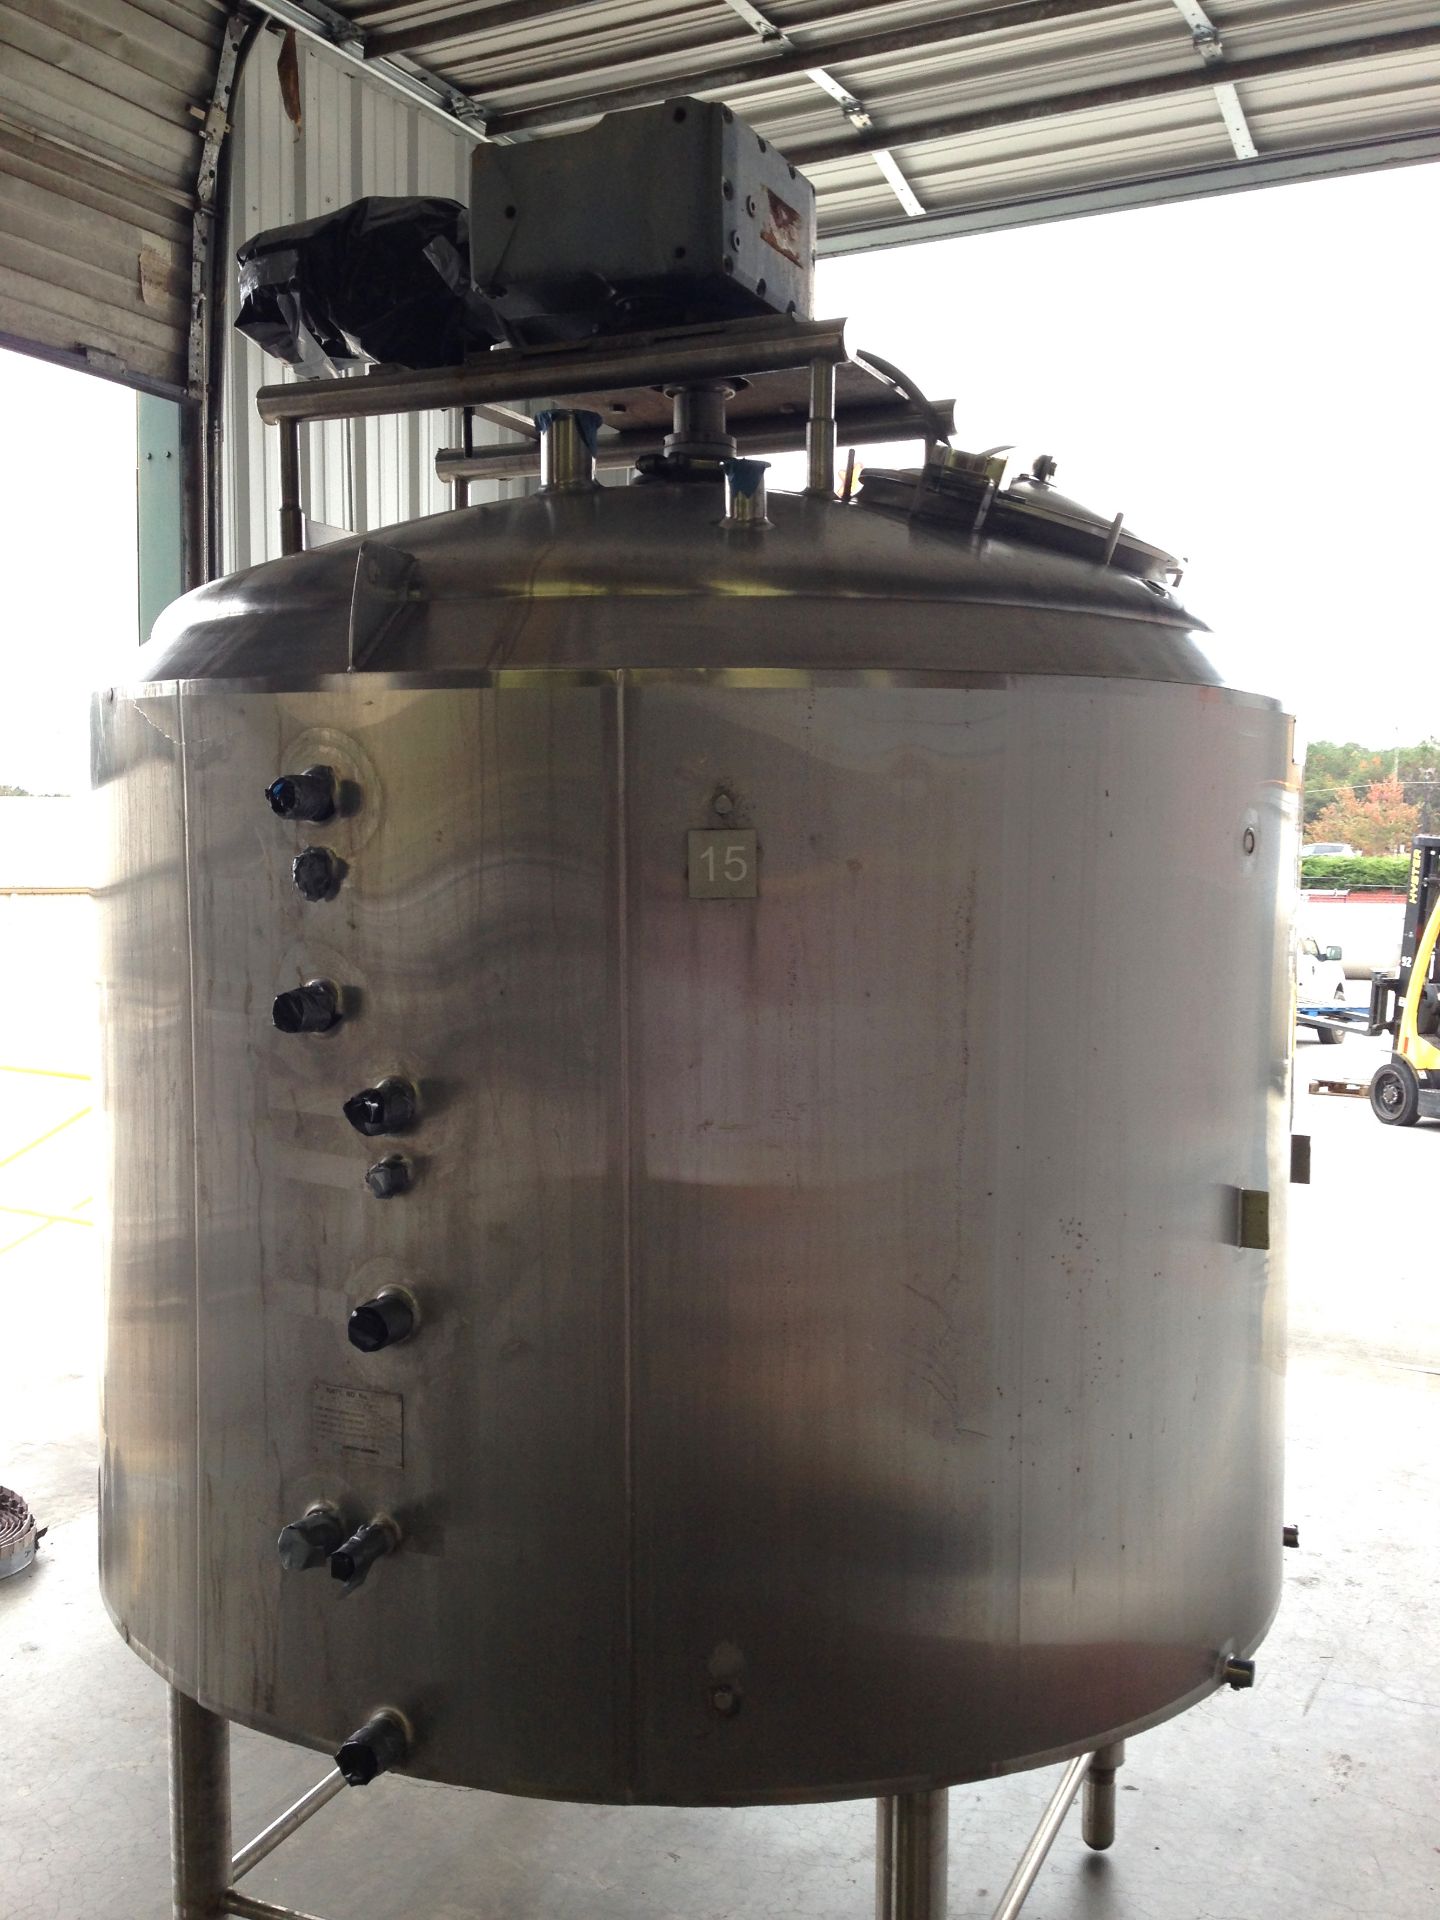 Cherry-Burrell 500 Gallon Jacketed Processor Tank Serial: E-313-90 Year: 1990316L Stainless Steel - Image 2 of 10